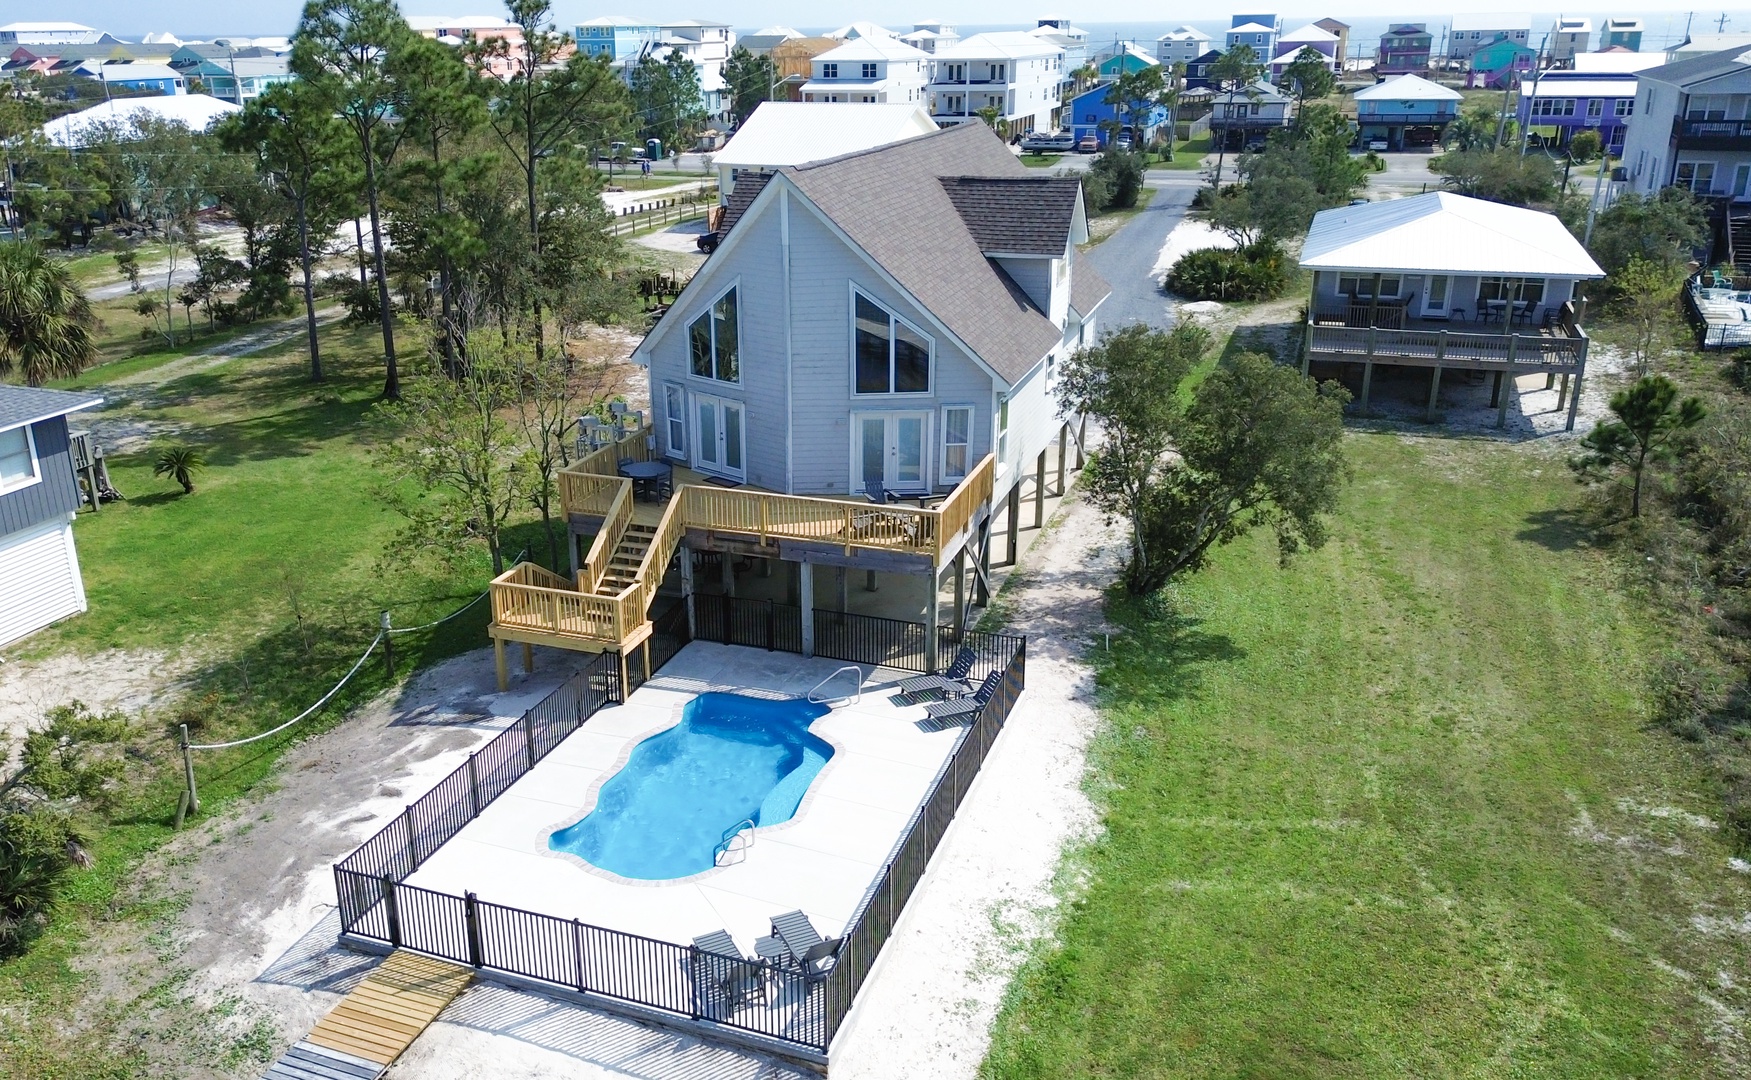 Welcome to Driftwood Dreams on Little Lagoon in Gulf Shores